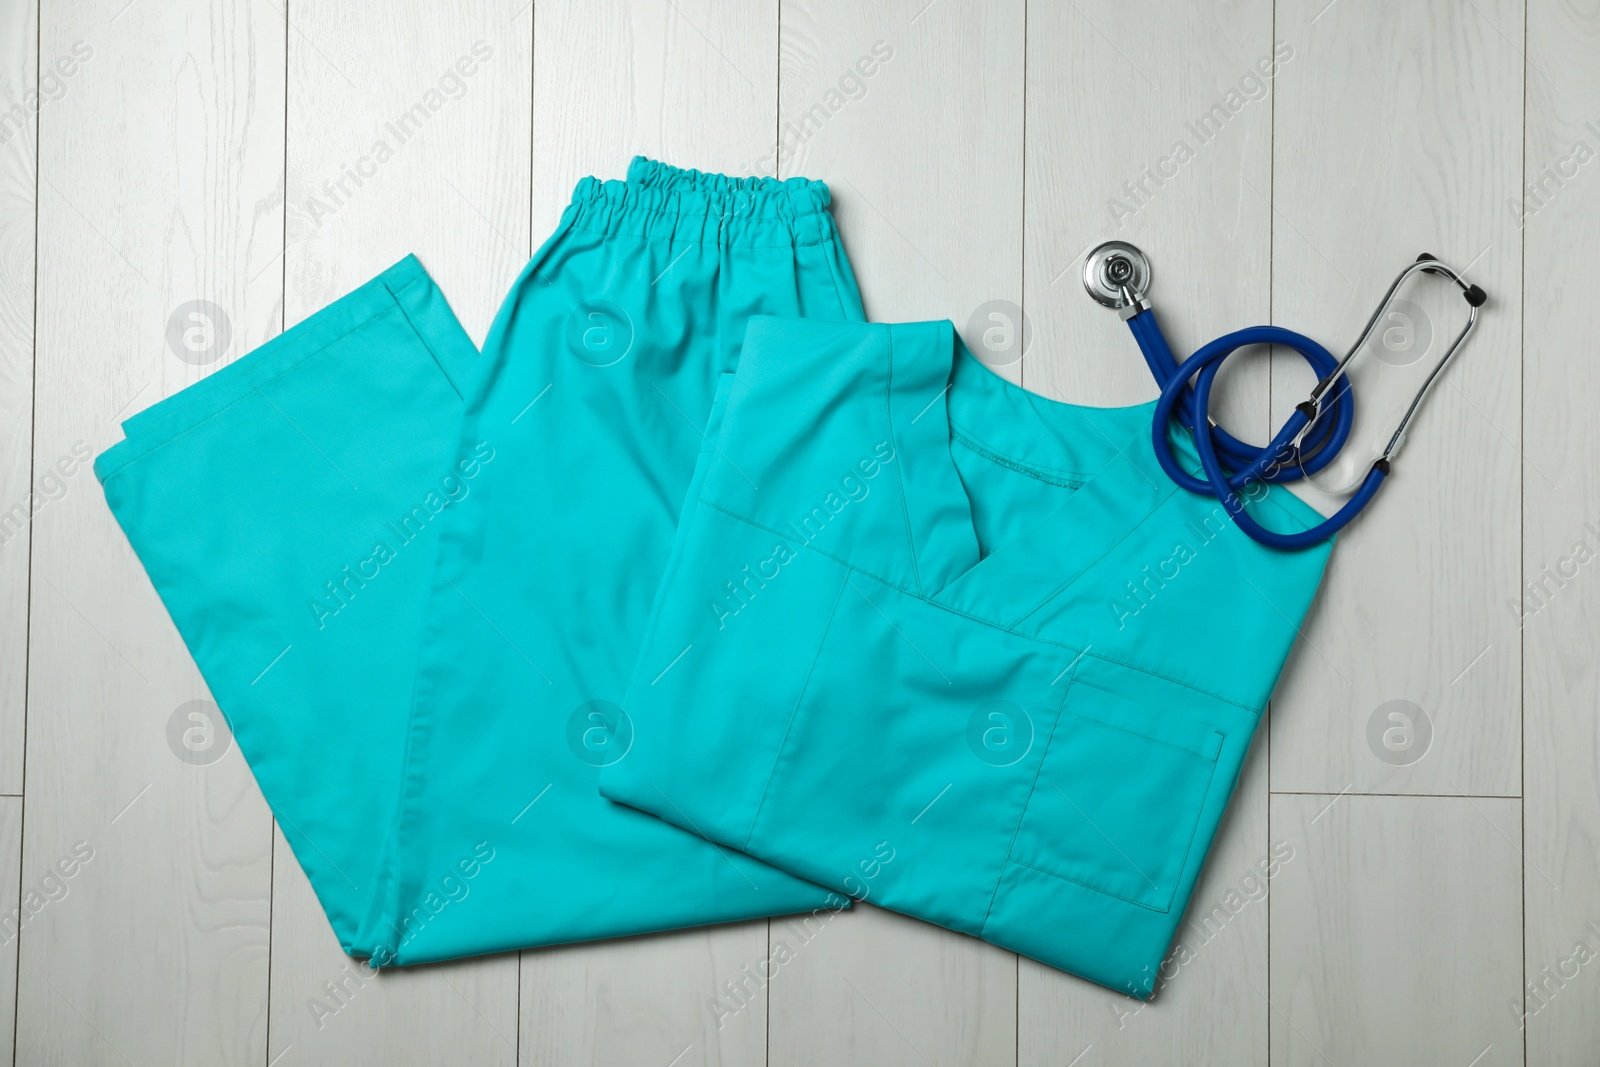 Photo of Clean scrubs and stethoscope on wooden background, top view. Medical objects